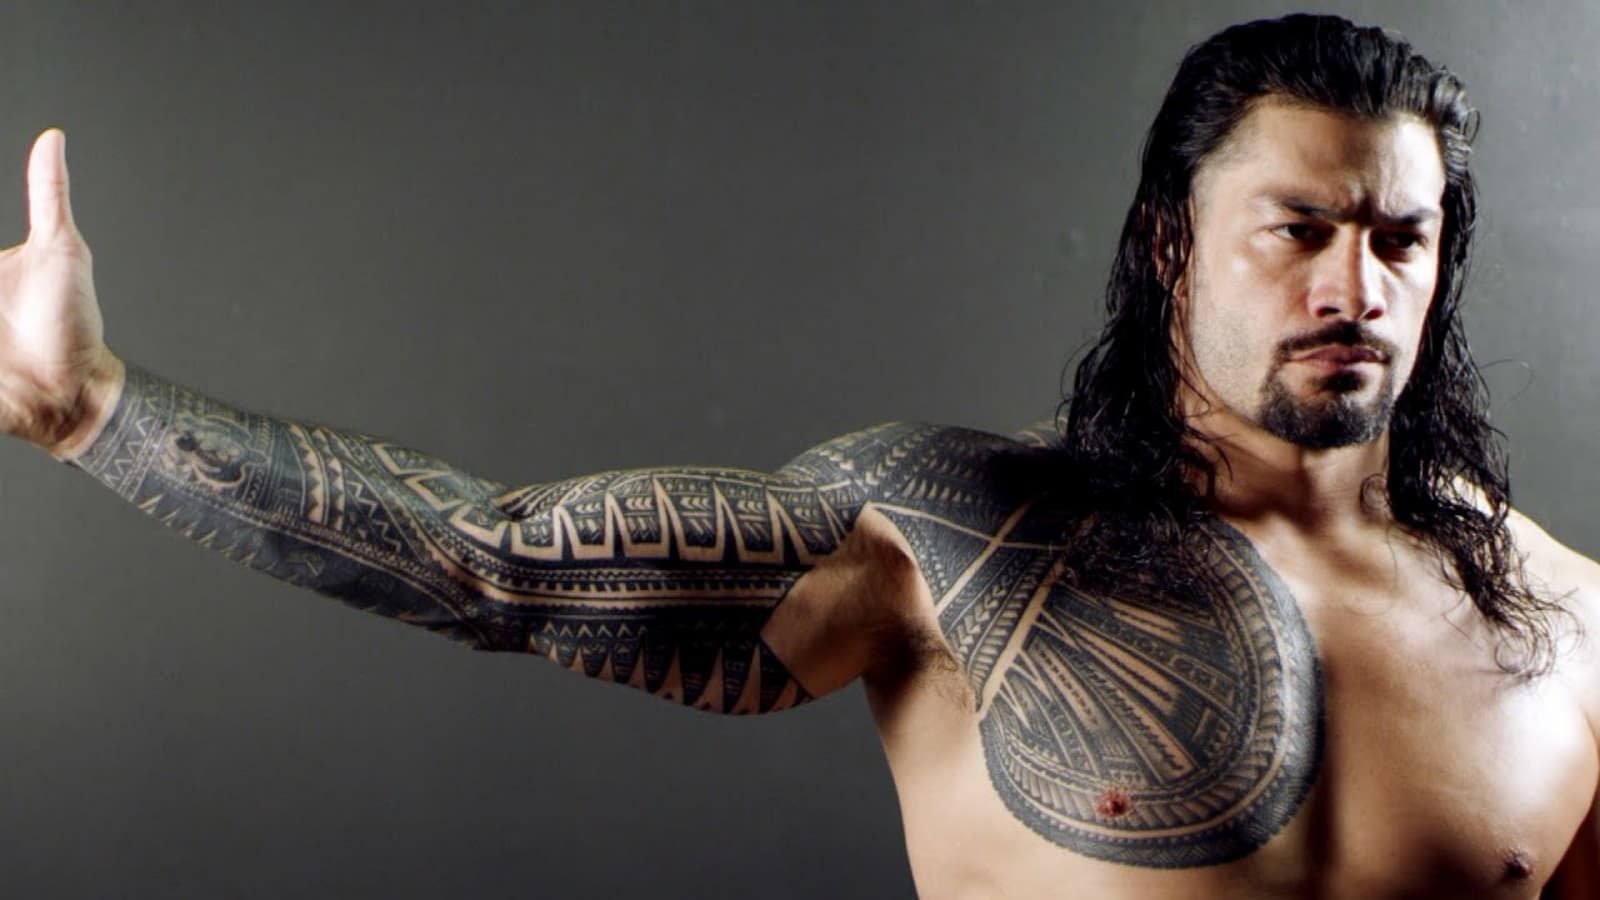 Maori Polynesian Tribal Chest Tattoo Inspired by The Rock - YouTube